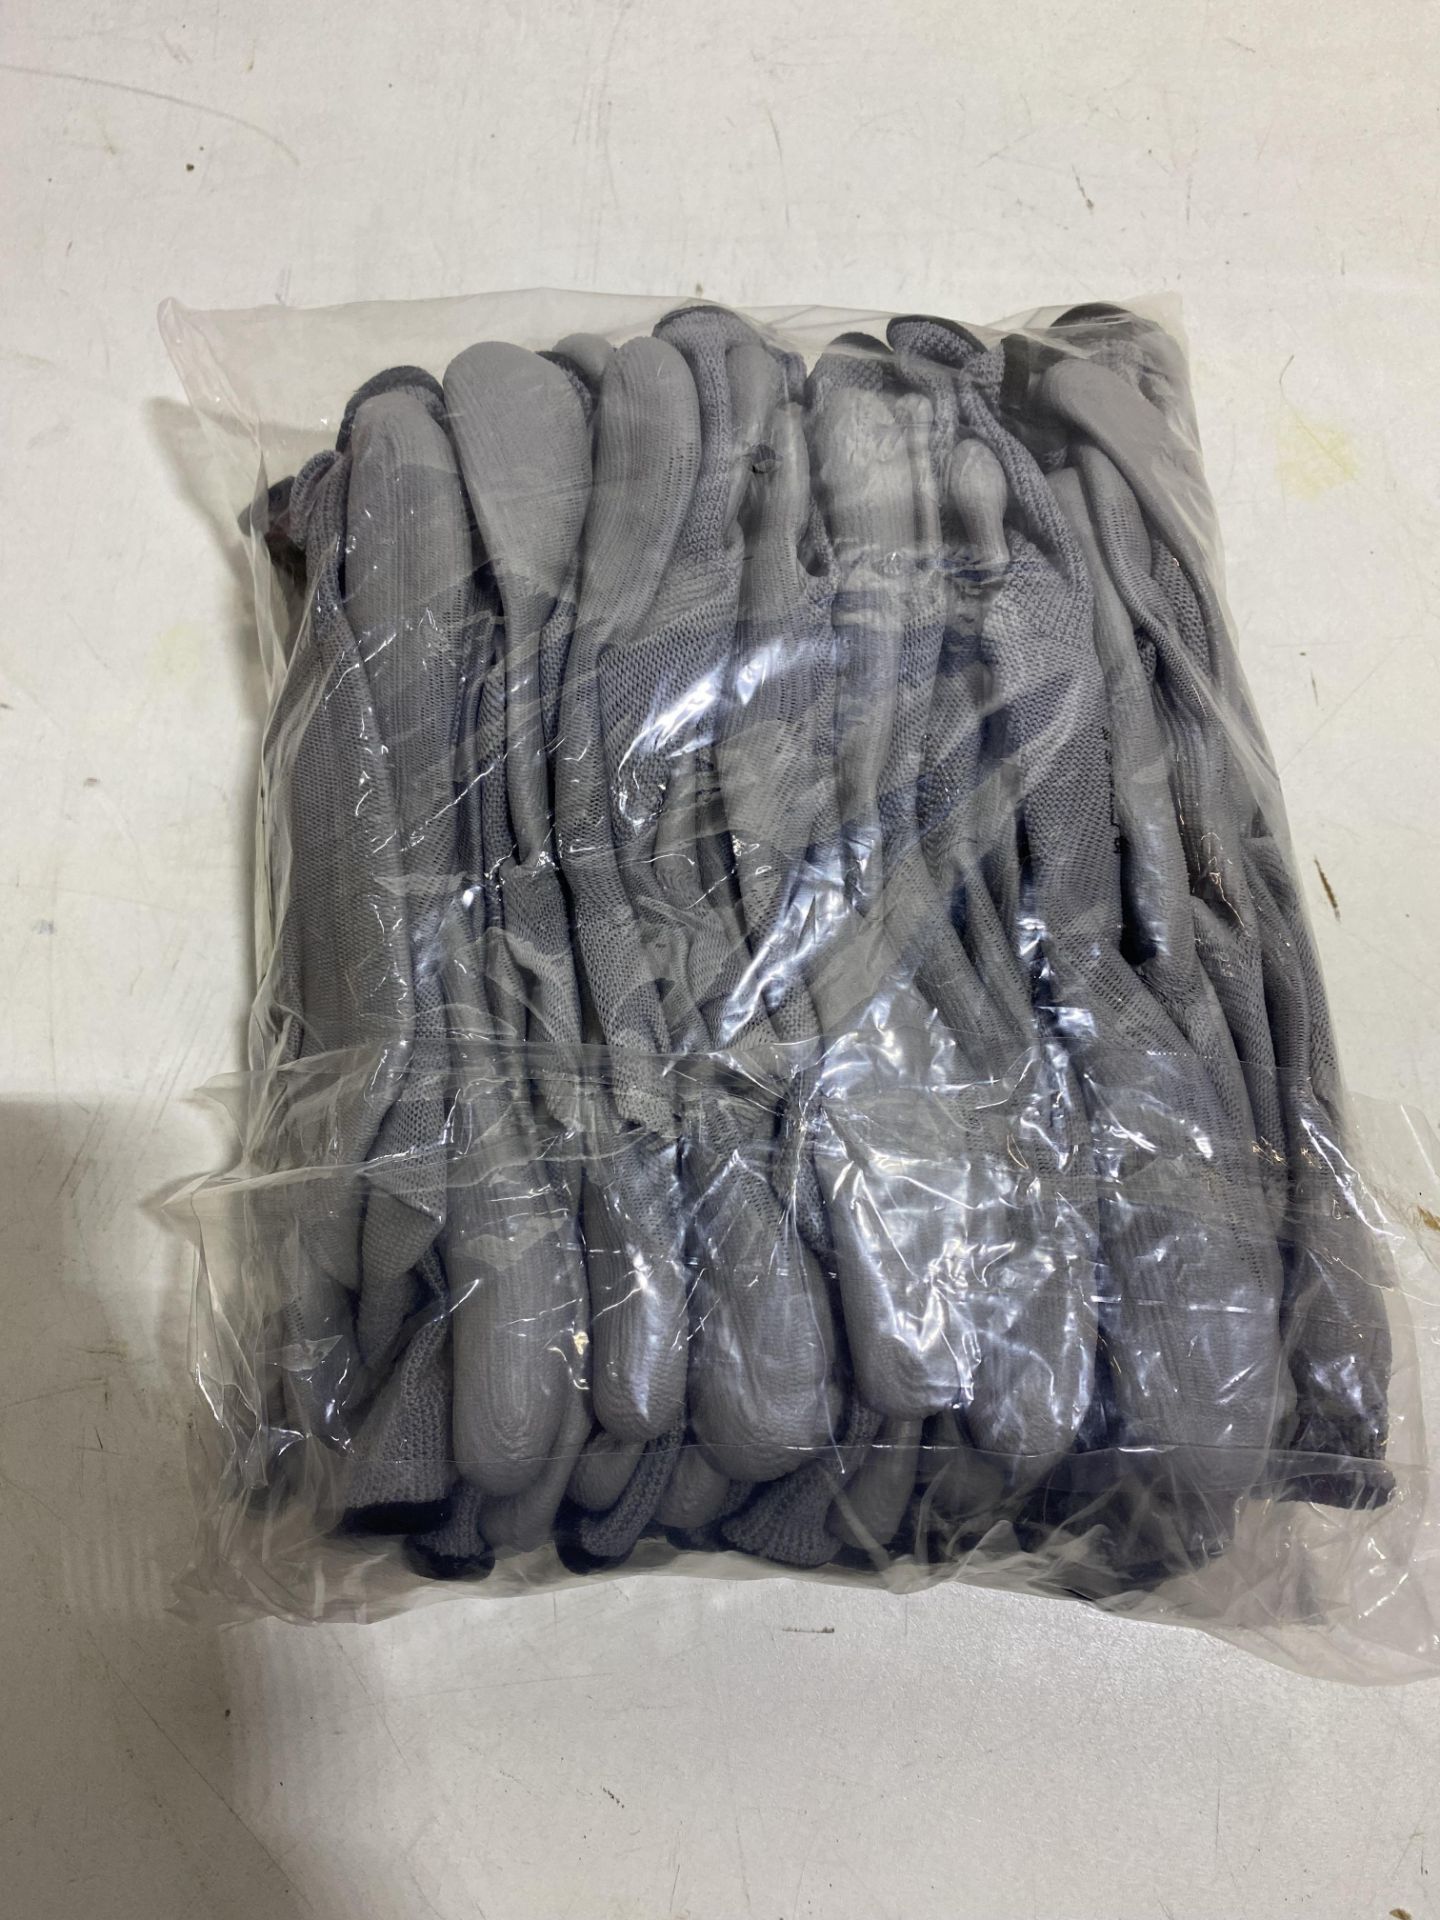 84 x Pairs Of Delta Plus Size 09 Grey Workers Gloves - Image 2 of 3